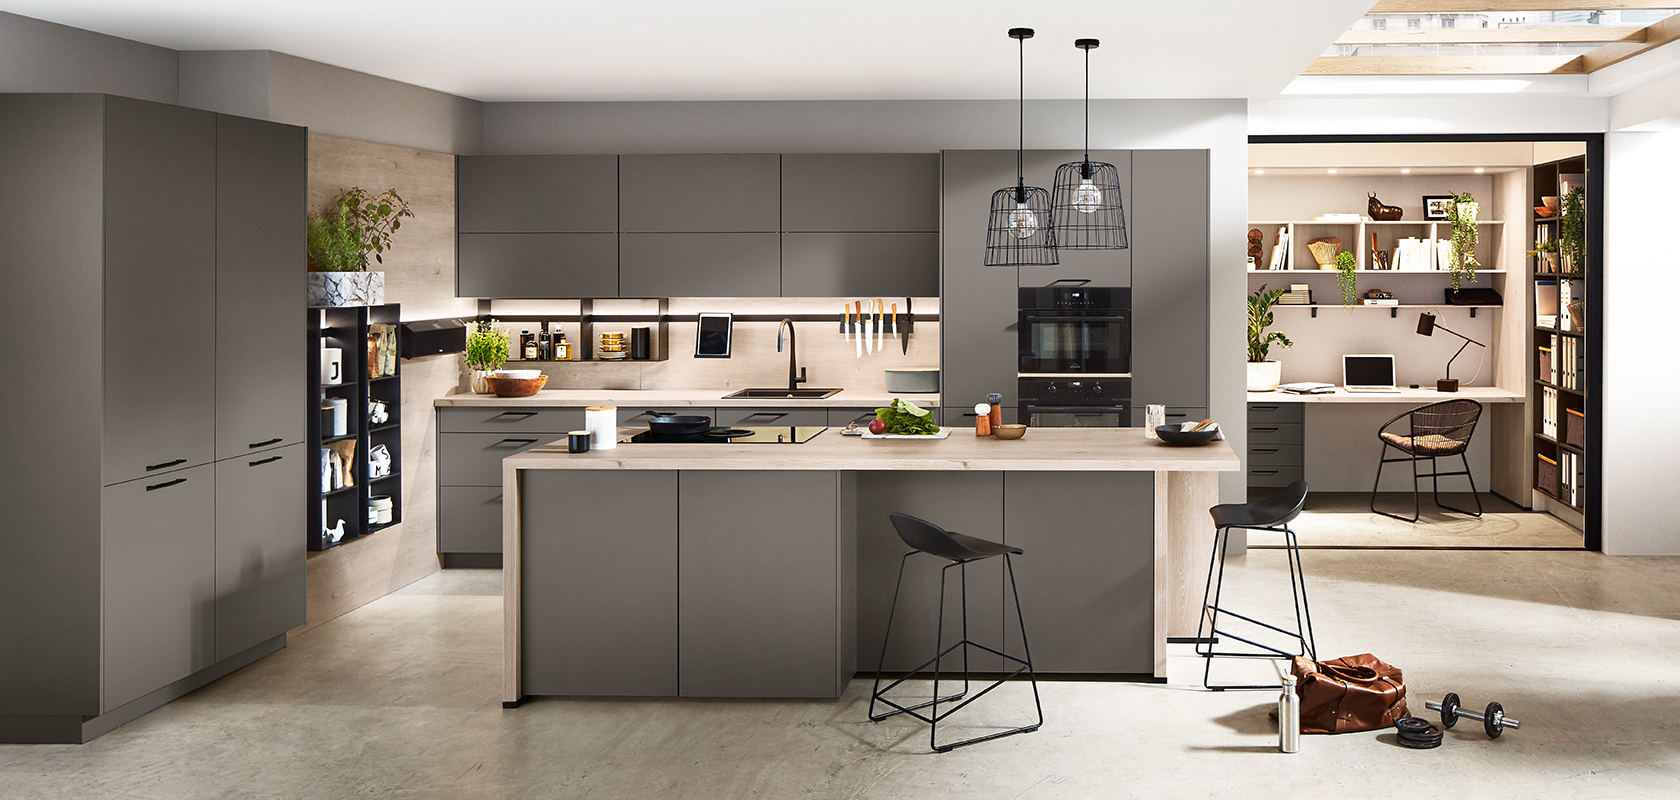 Modern kitchen design with sleek gray cabinetry, integrated appliances, and a tasteful island with bar stools, seamlessly extending to a cozy home office nook.